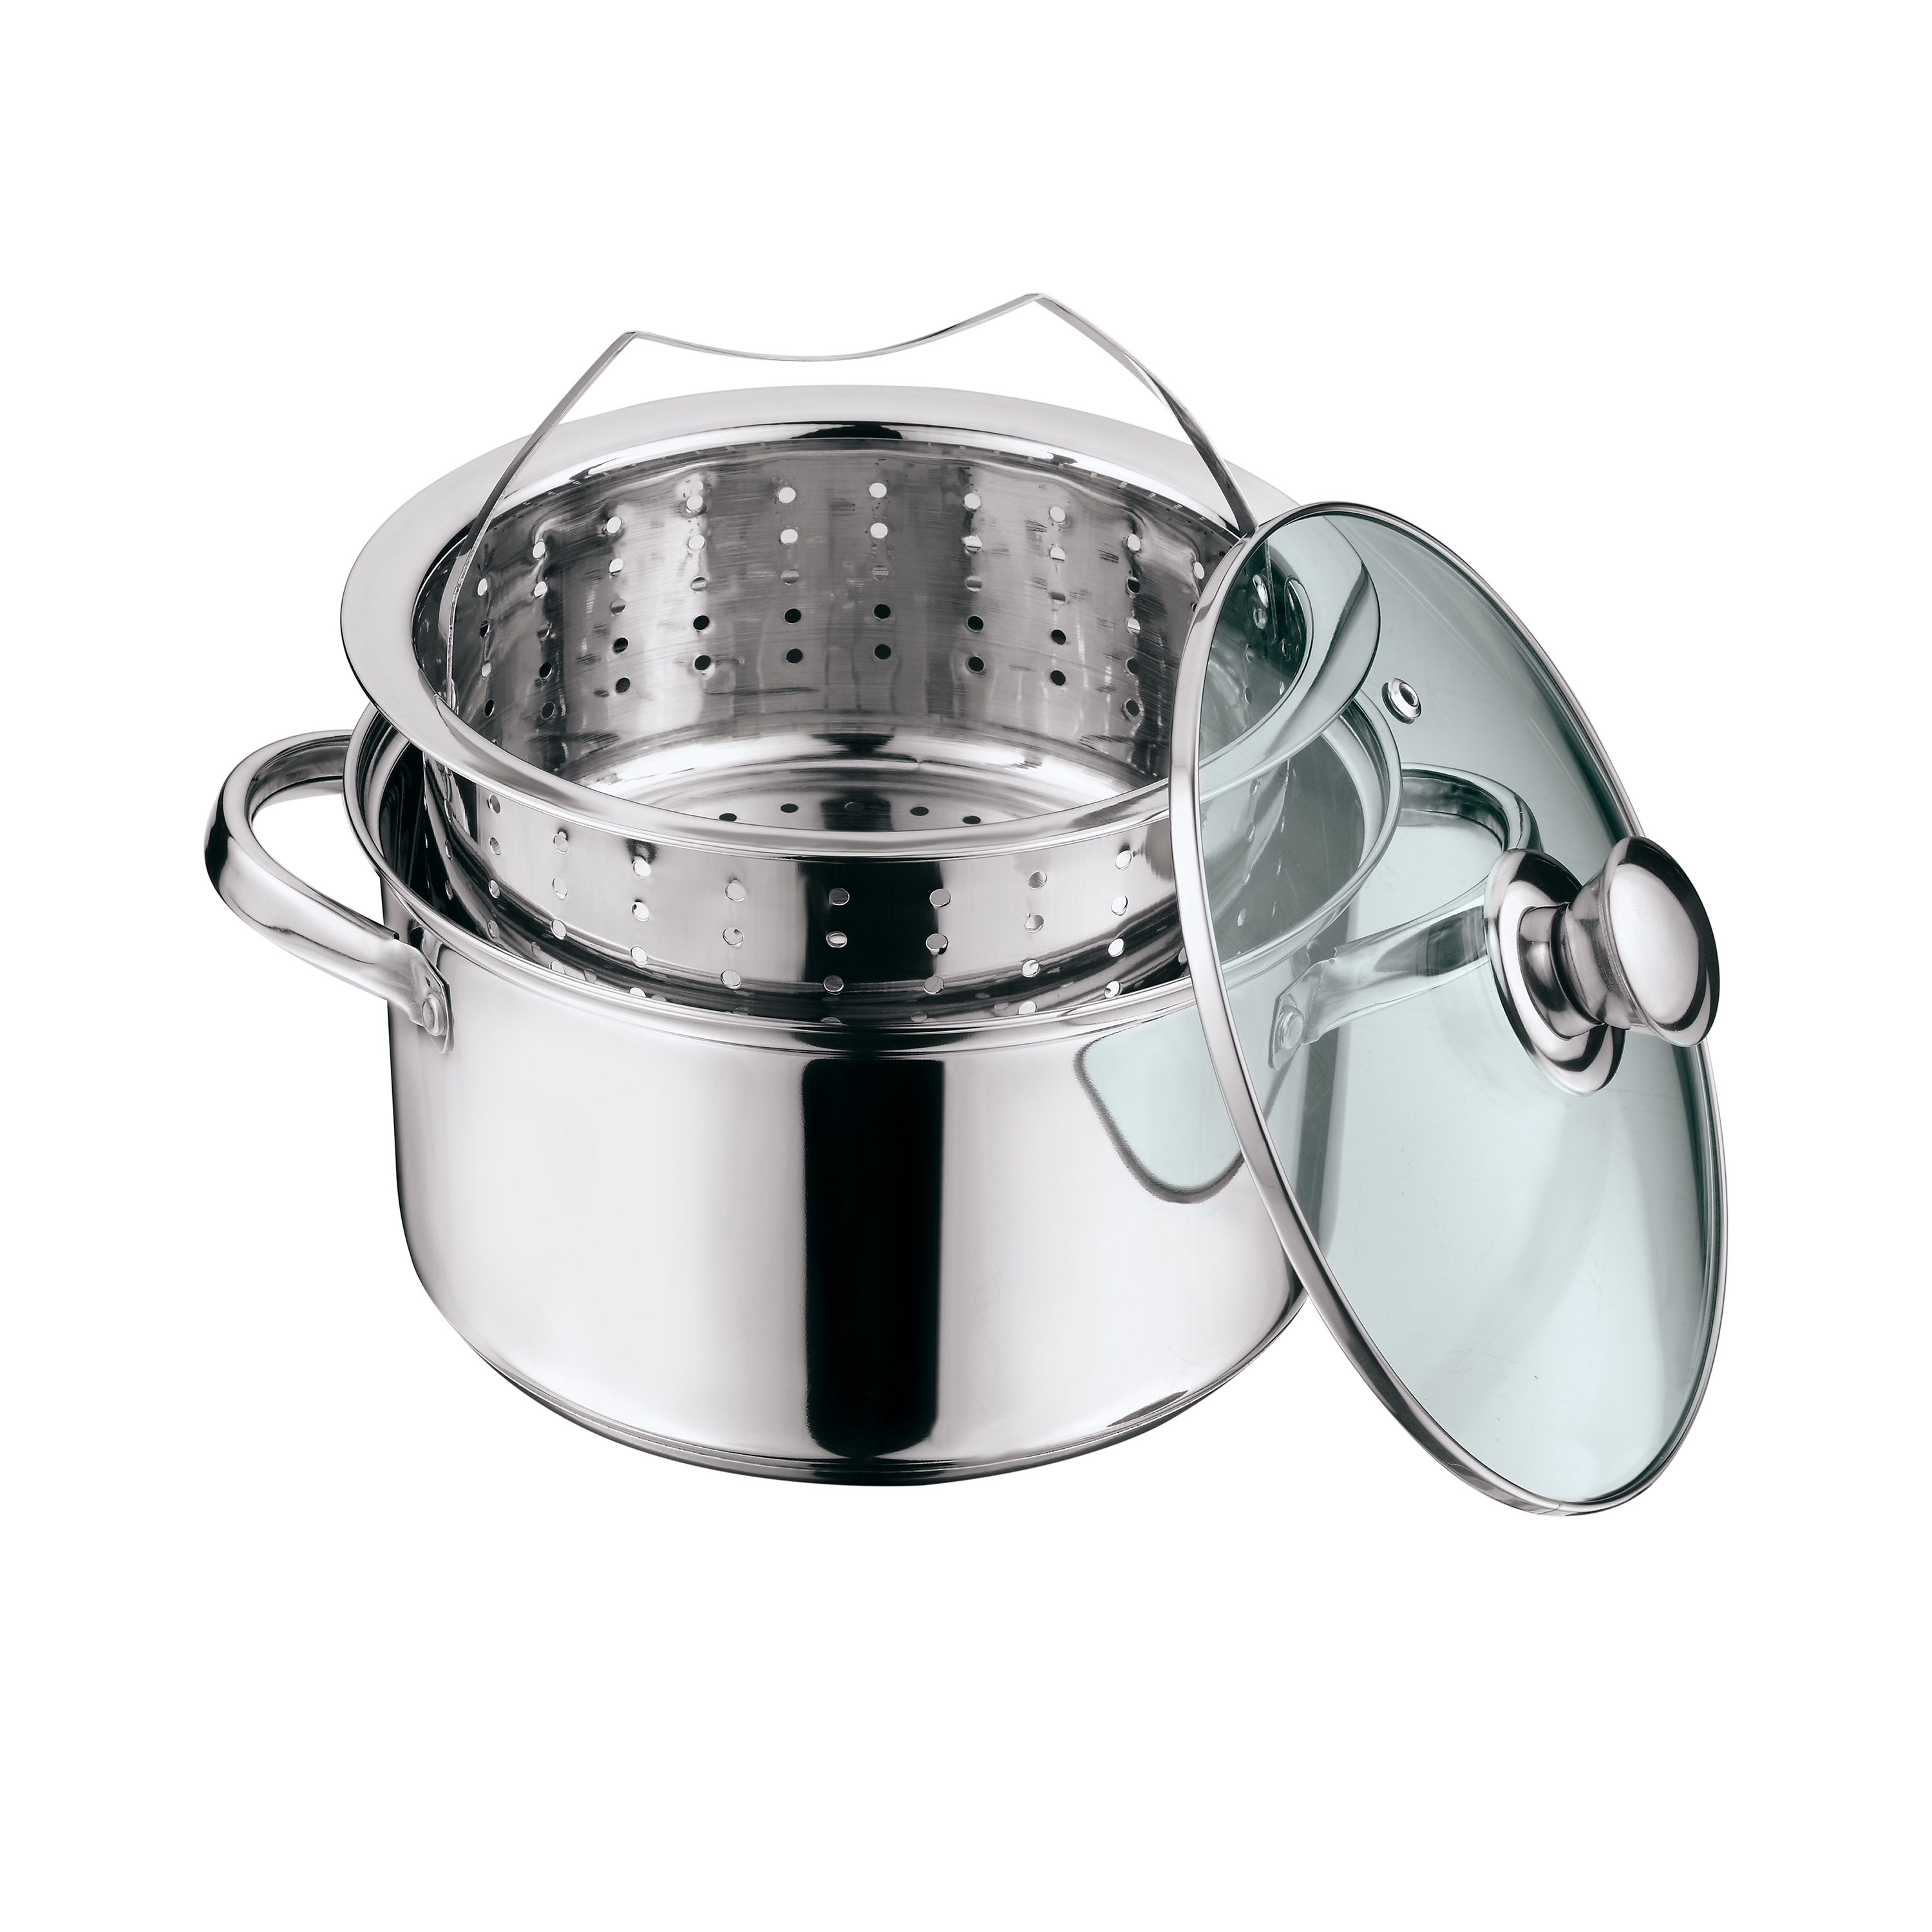 Mainstays Stainless Steel 4 Quart Steamer Pot with Steamer Insert and Lid - image 1 of 6